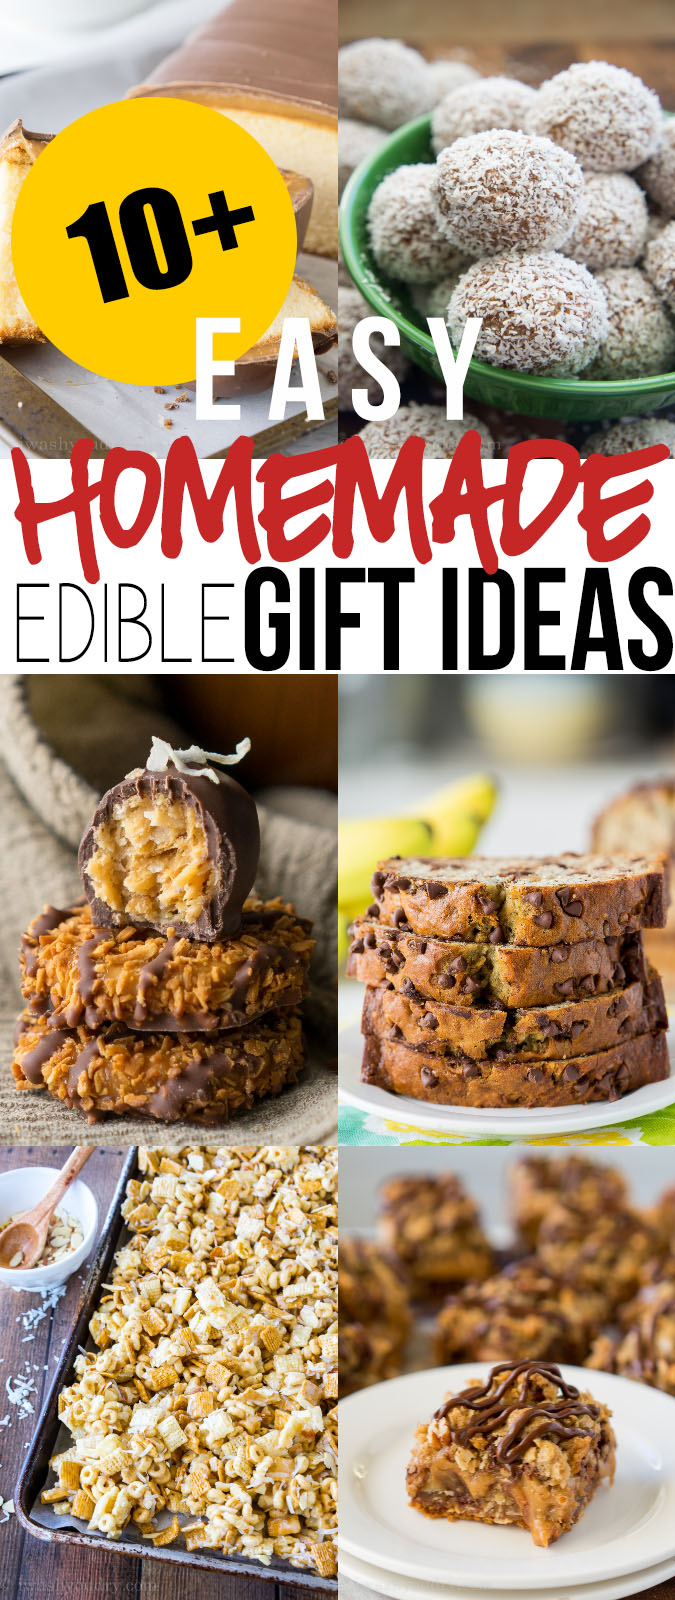 I love all of these super easy Edible Homemade Gift Ideas for the Holidays! So many delicious treats to choose from!